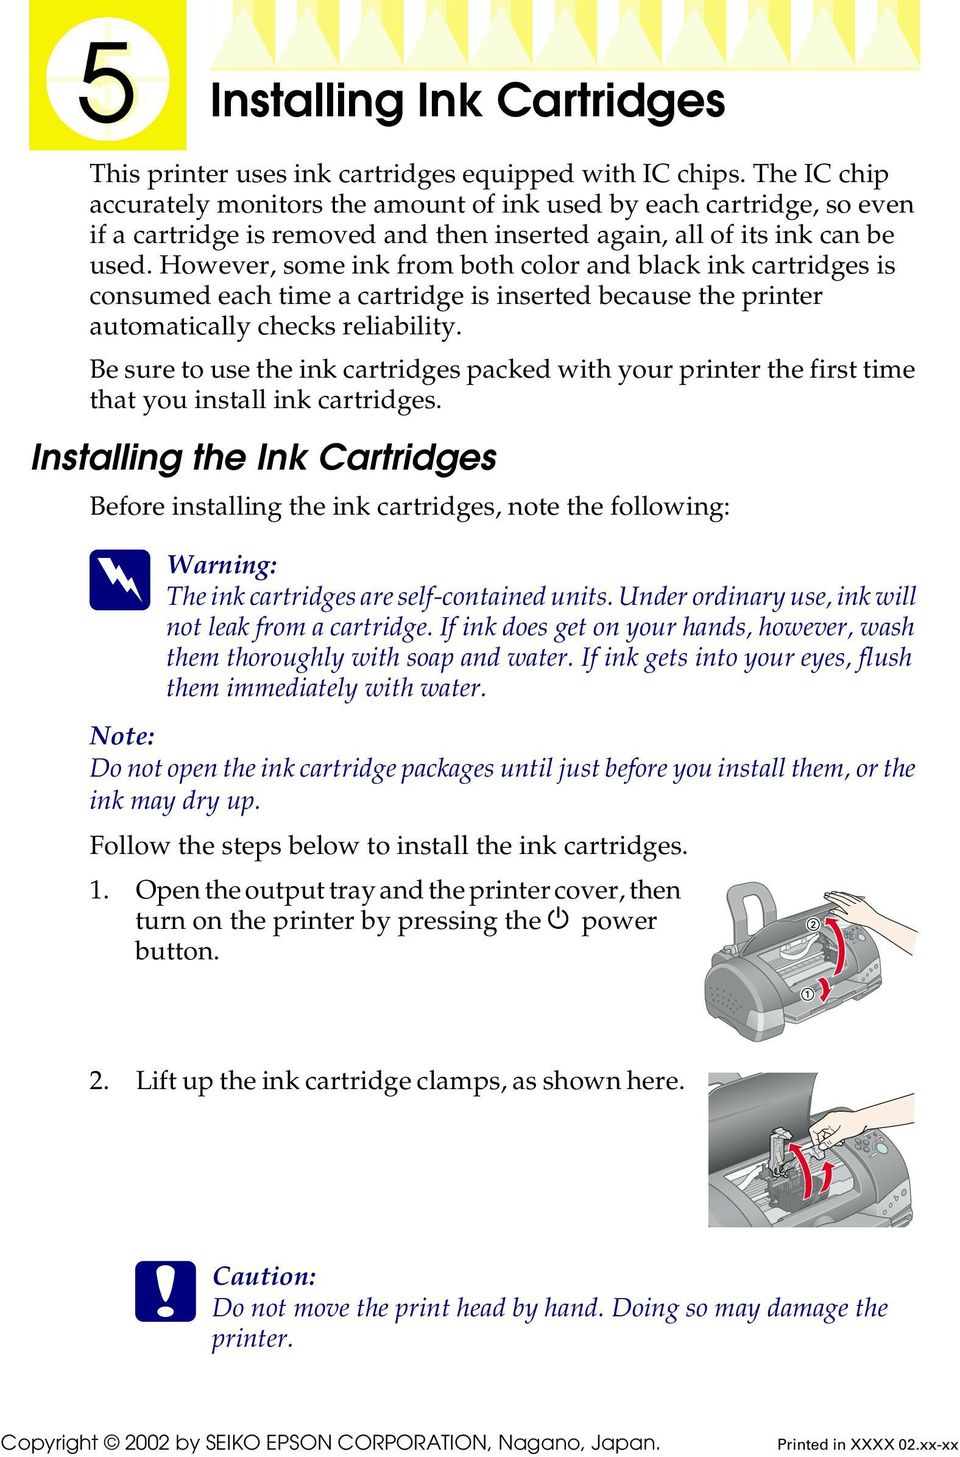 However, some ink from both color and black ink cartridges is consumed each time a cartridge is inserted because the printer automatically checks reliability.